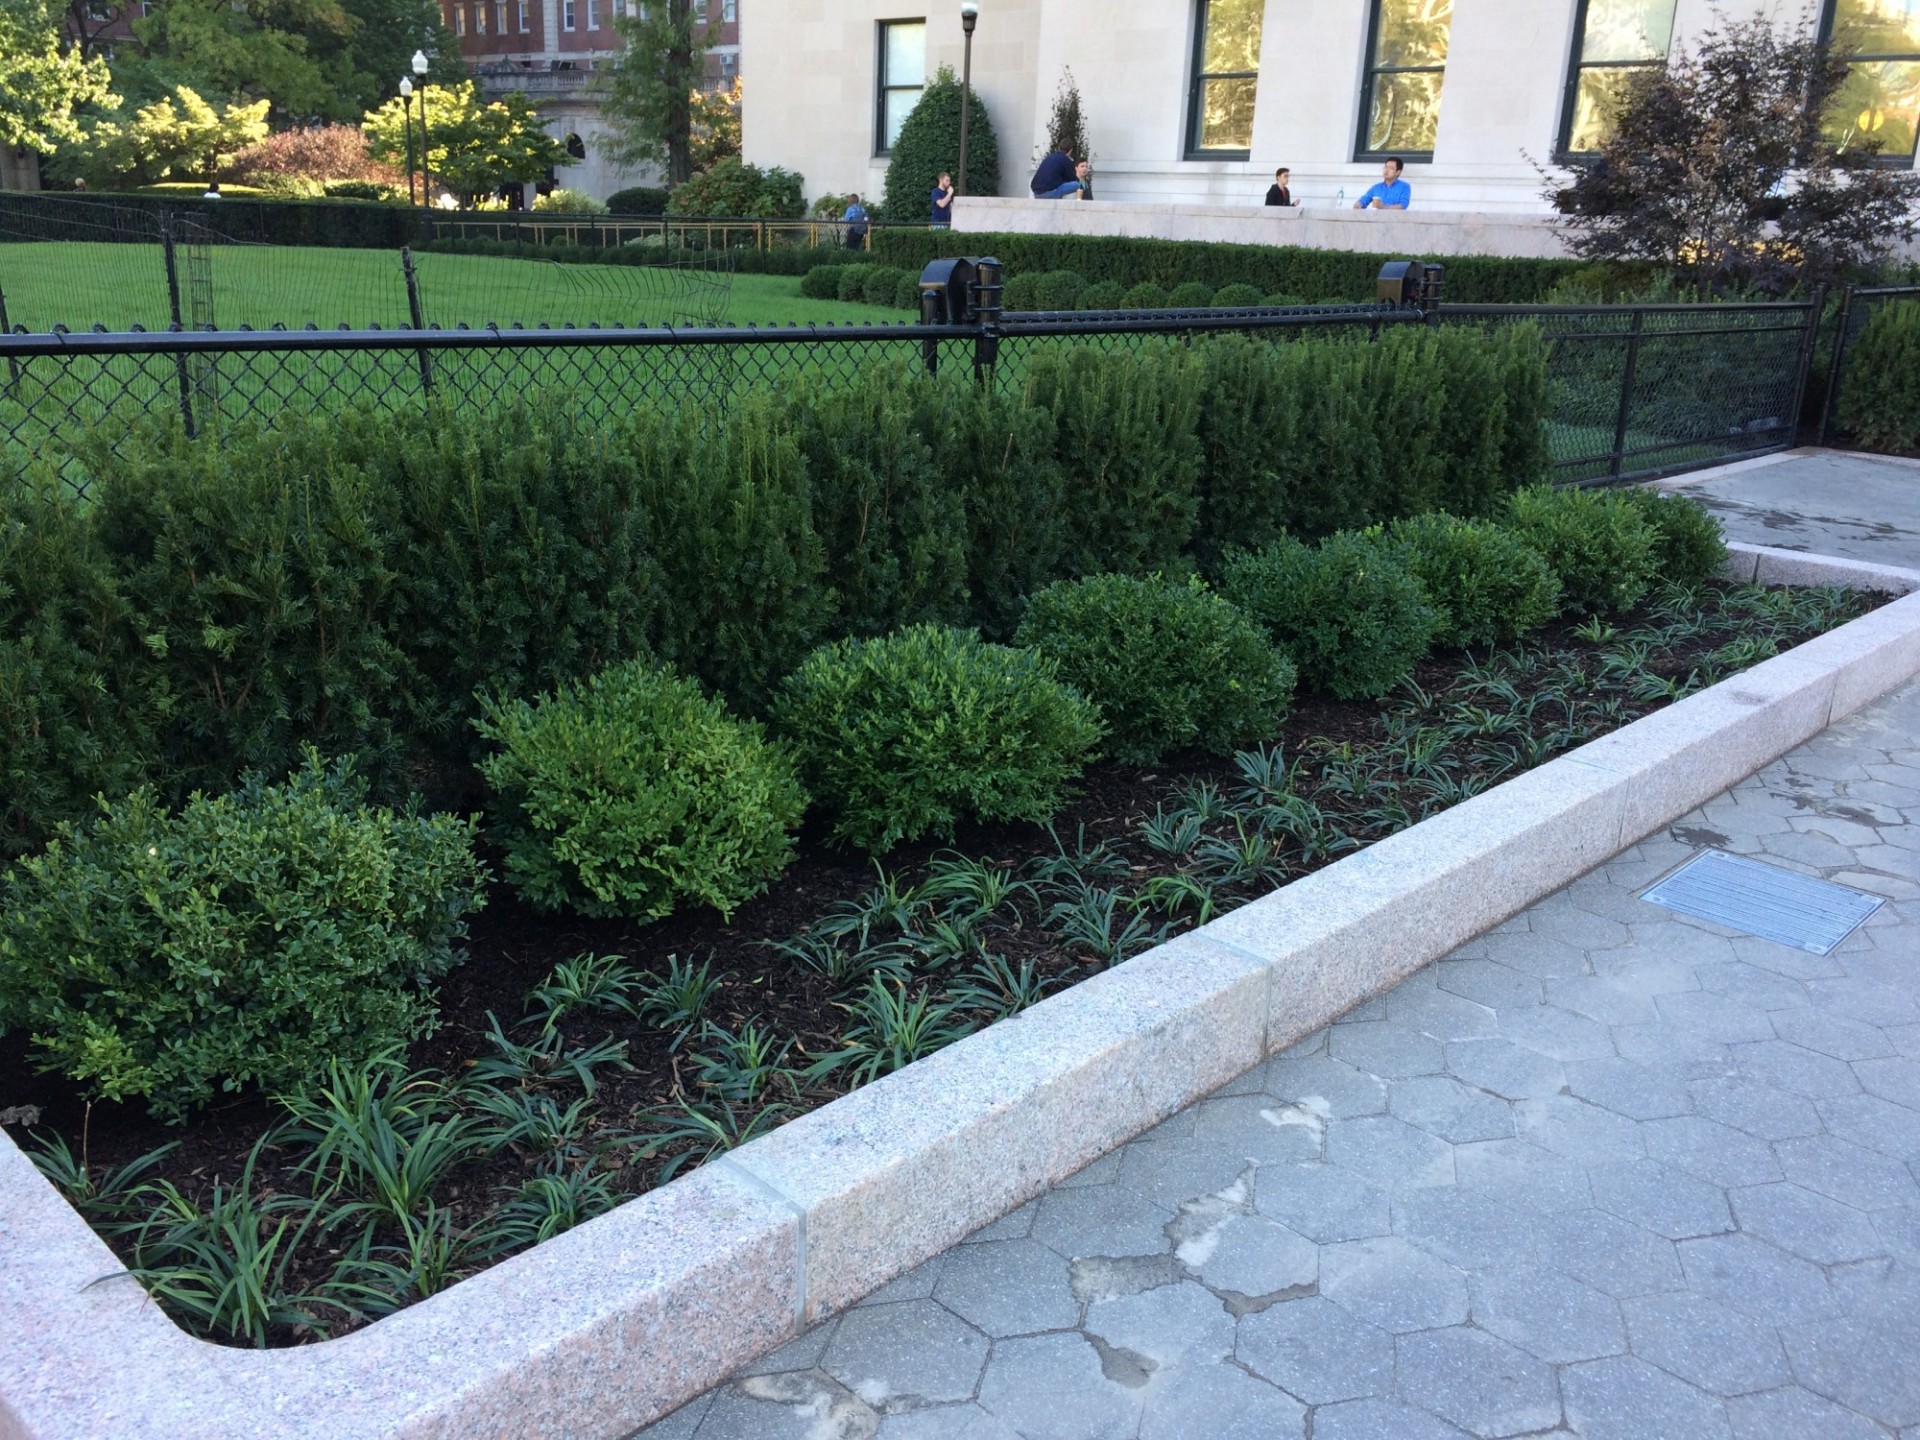 Planting beds on the perimeter of Butler Lawn (Photograph from October 3, 2017)